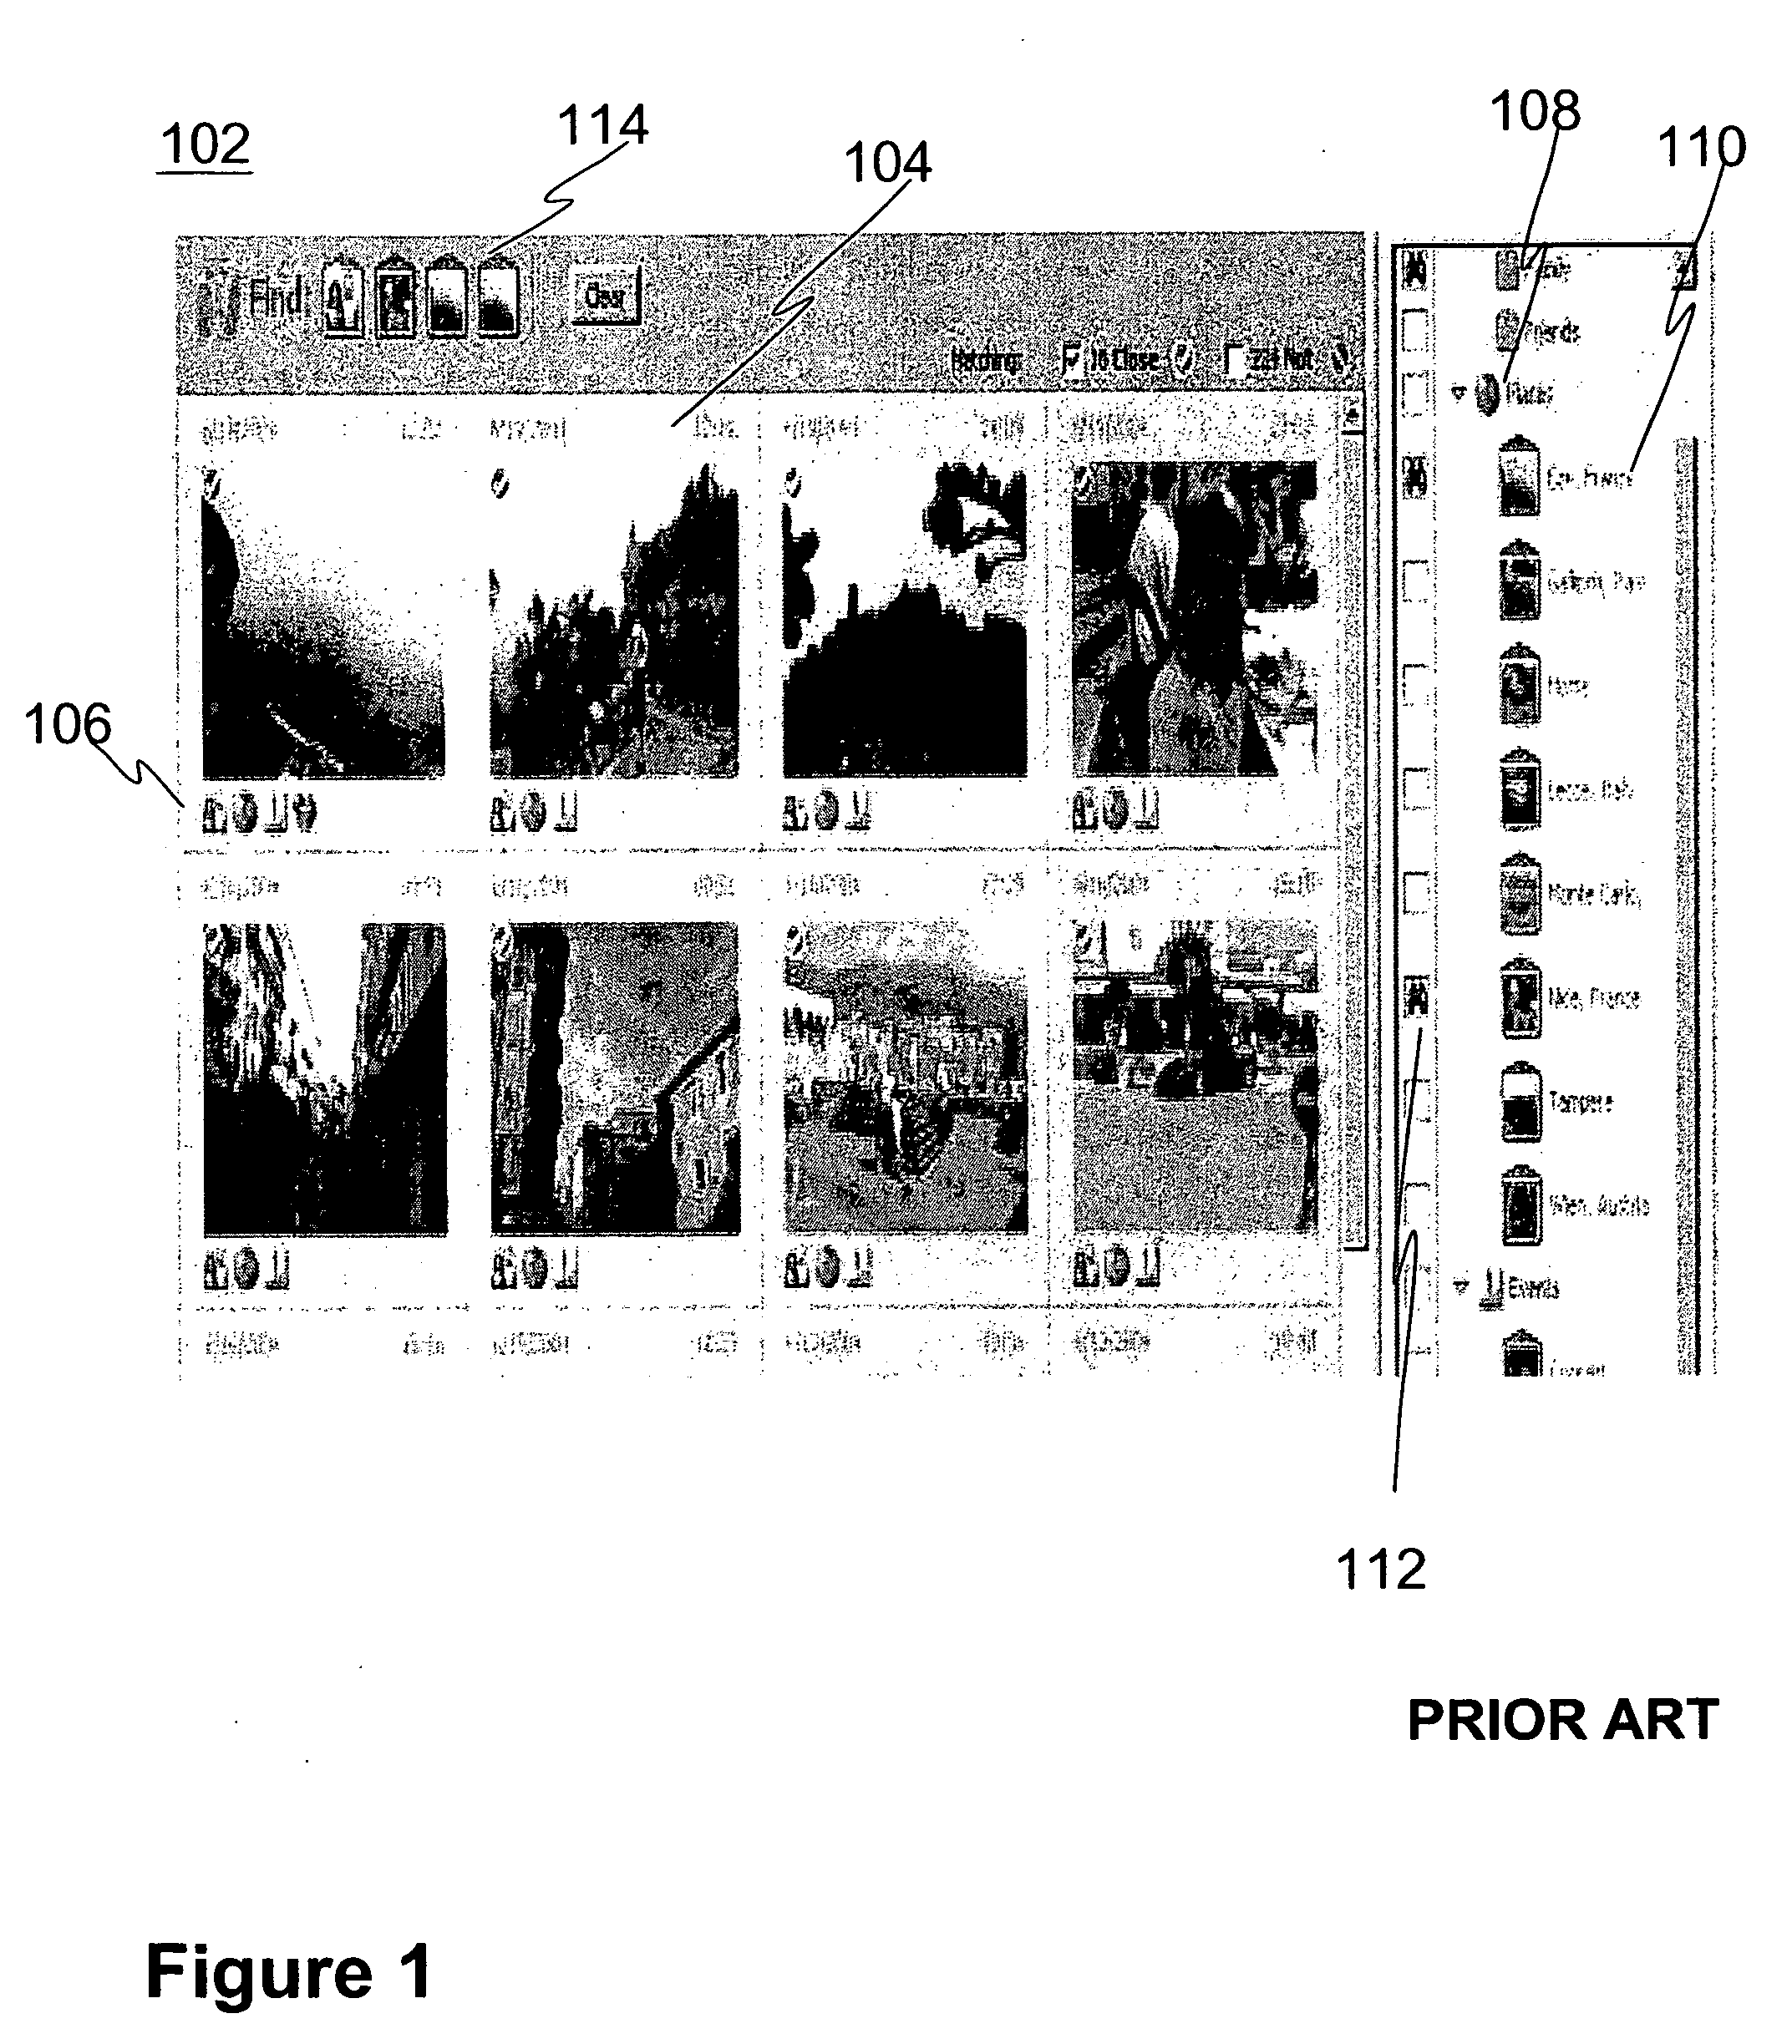 Method and a device for visual management of metadata